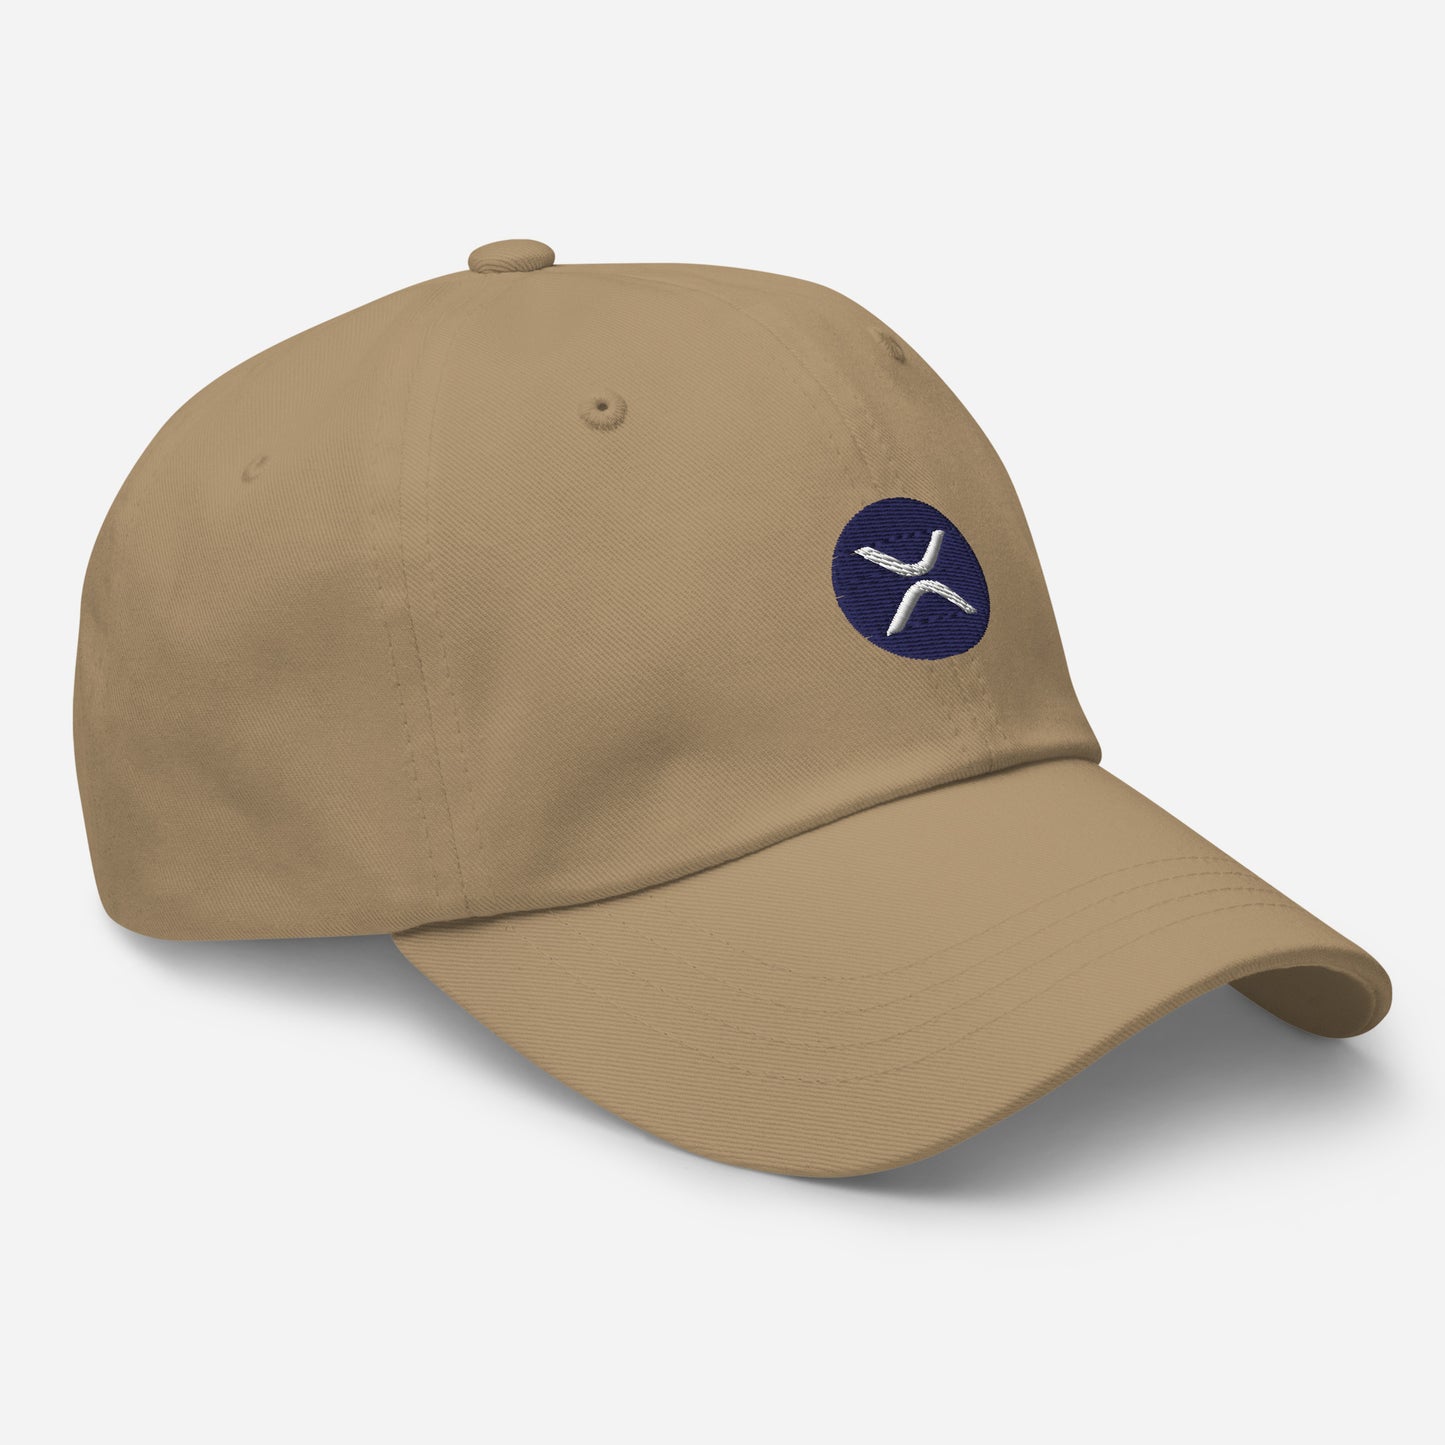 XRP - Fitted baseball cap